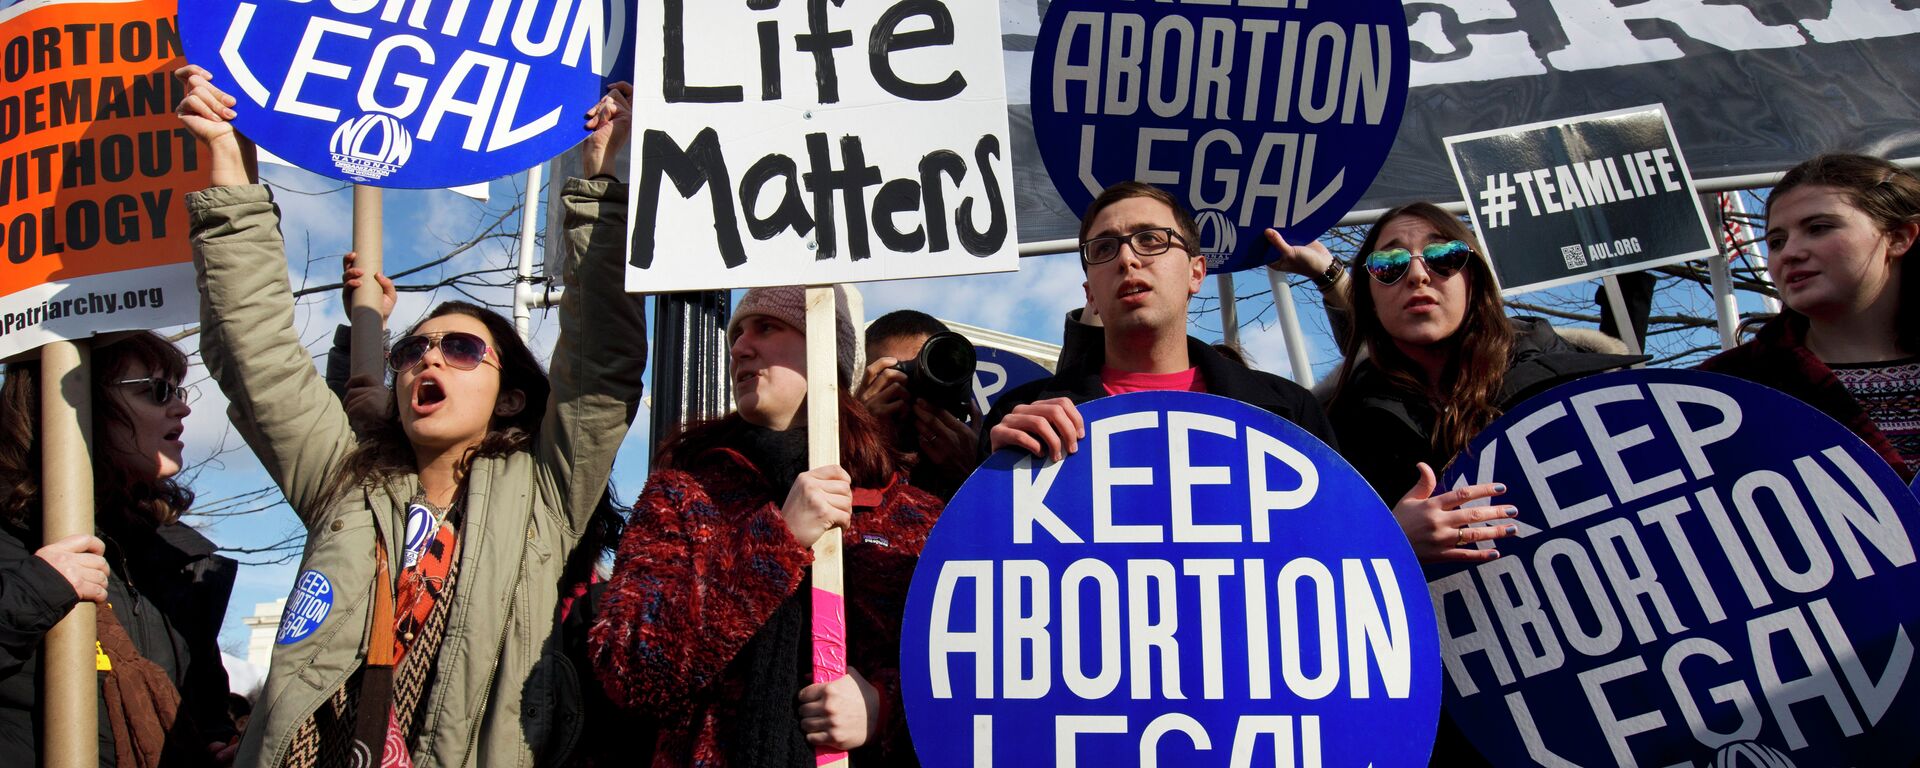 Abortion rights advocates hold signs while anti-abortion demonstrators walk by during the annual March for Life in Washington, DC. - Sputnik International, 1920, 29.04.2019